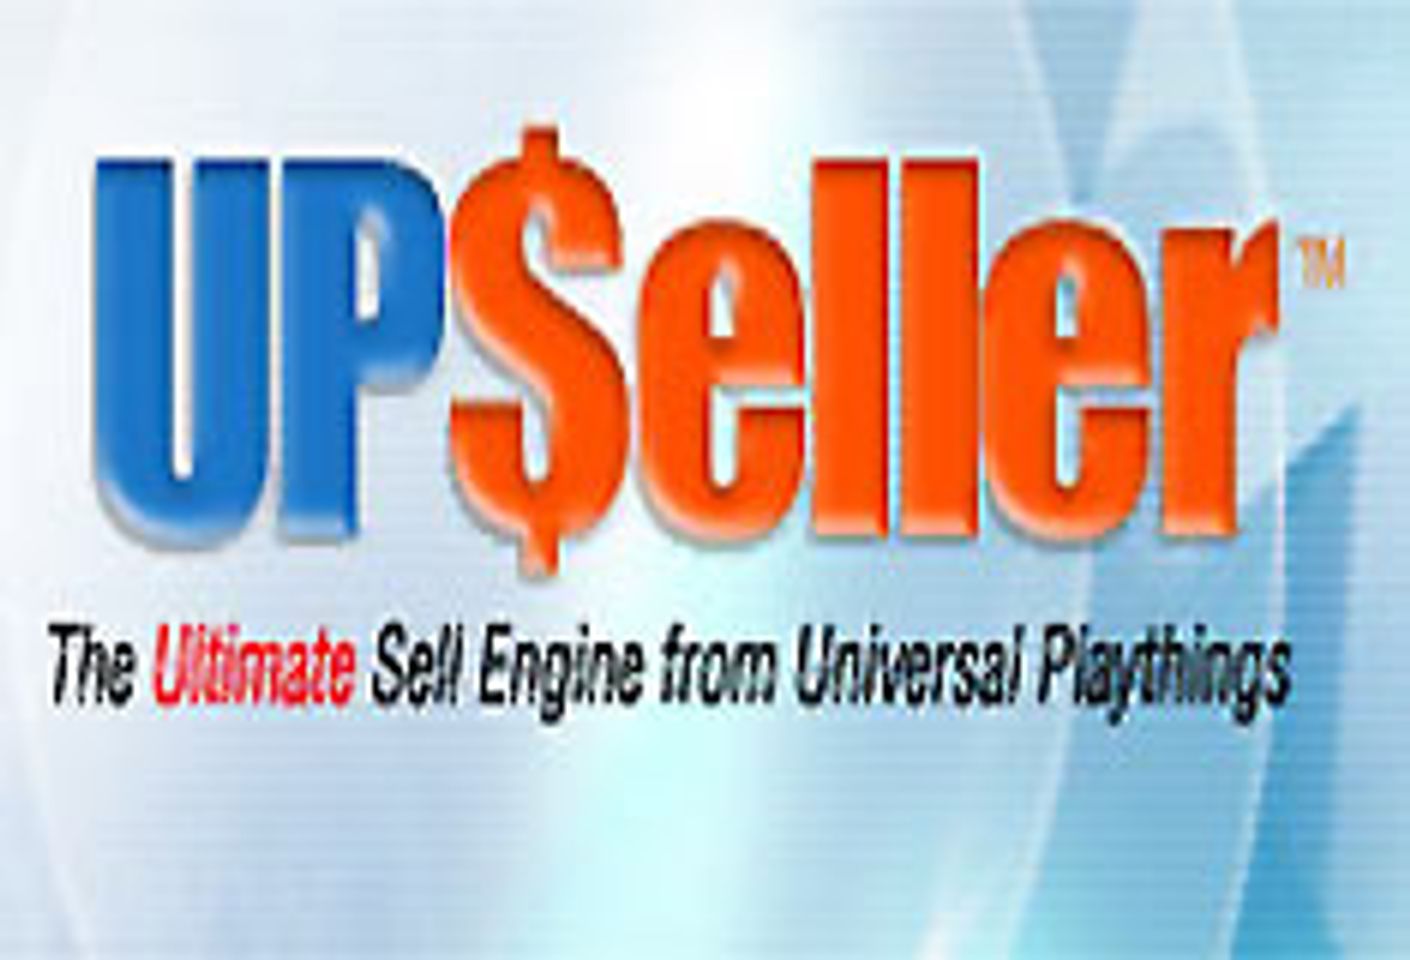 New "Sell Engine" Launched: Universal Playthings